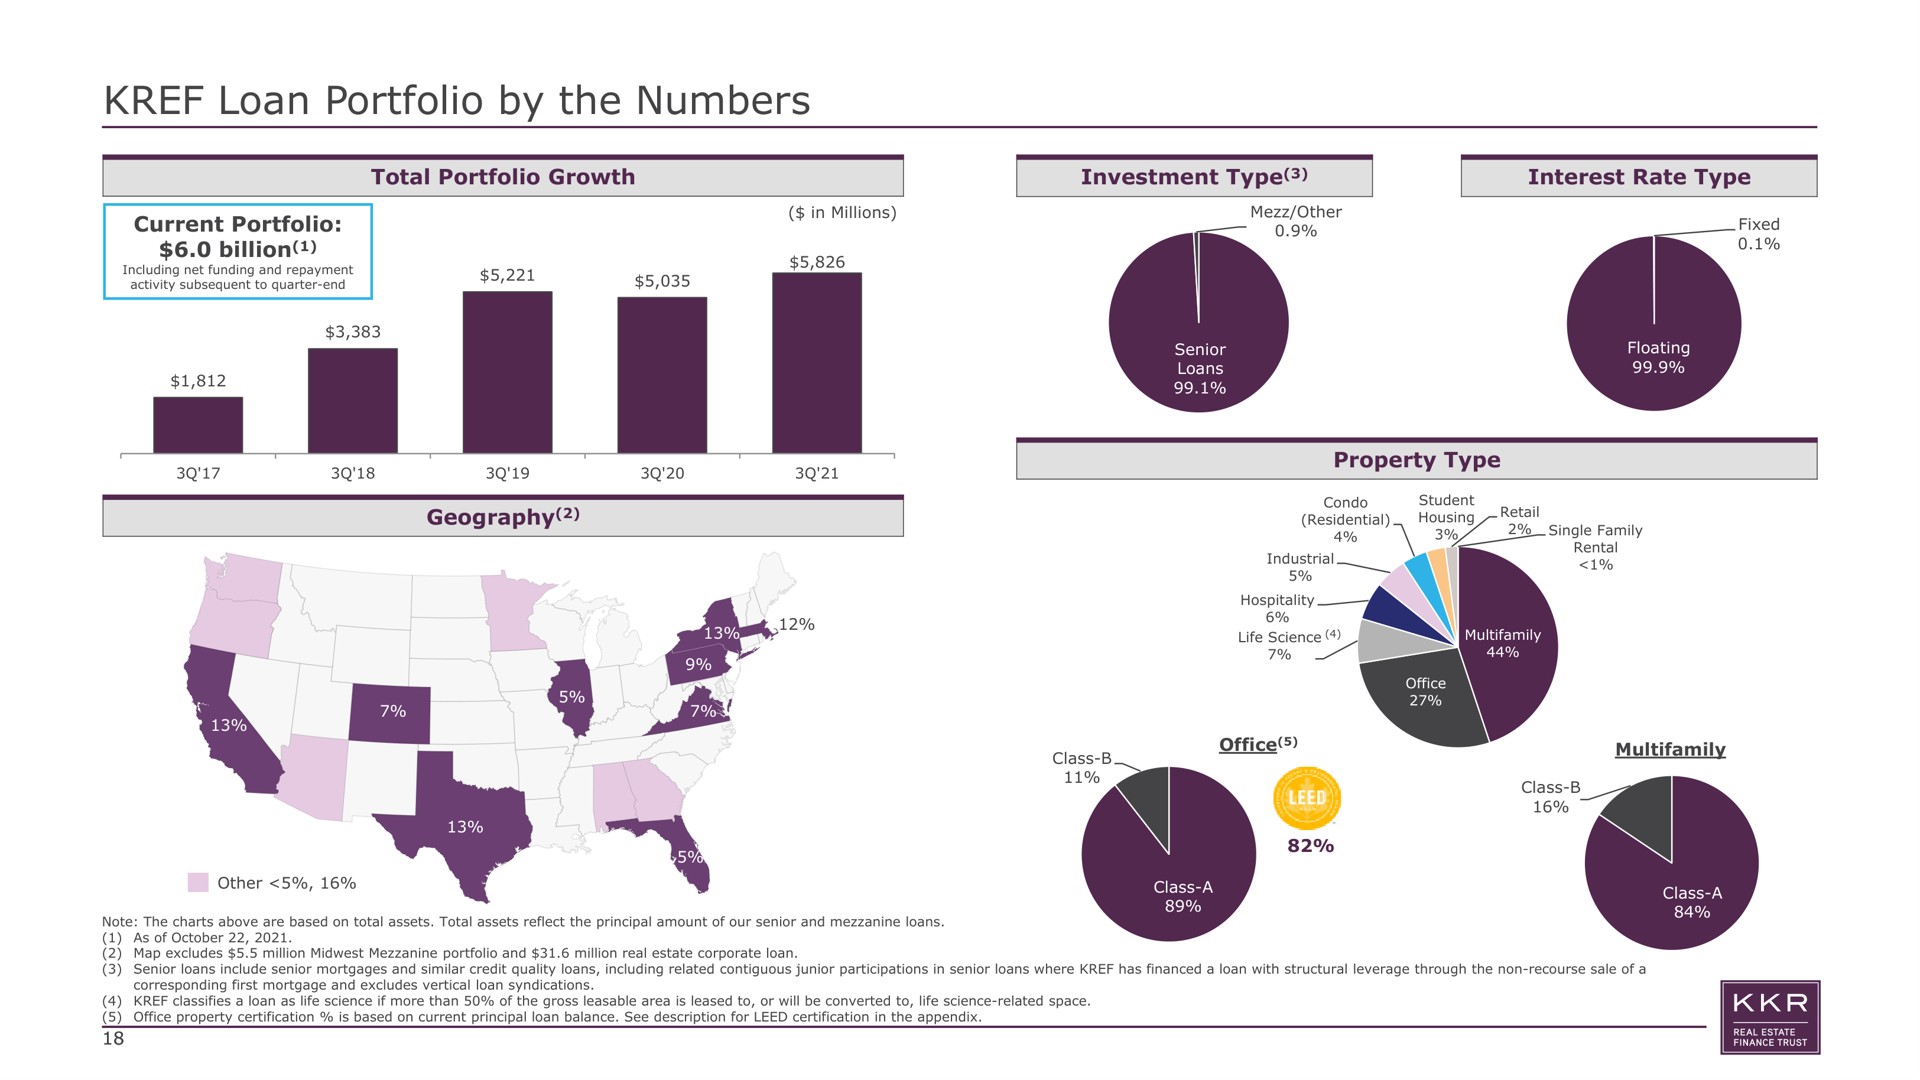 loan portfolio by the numbers | KKR Real Estate Finance Trust